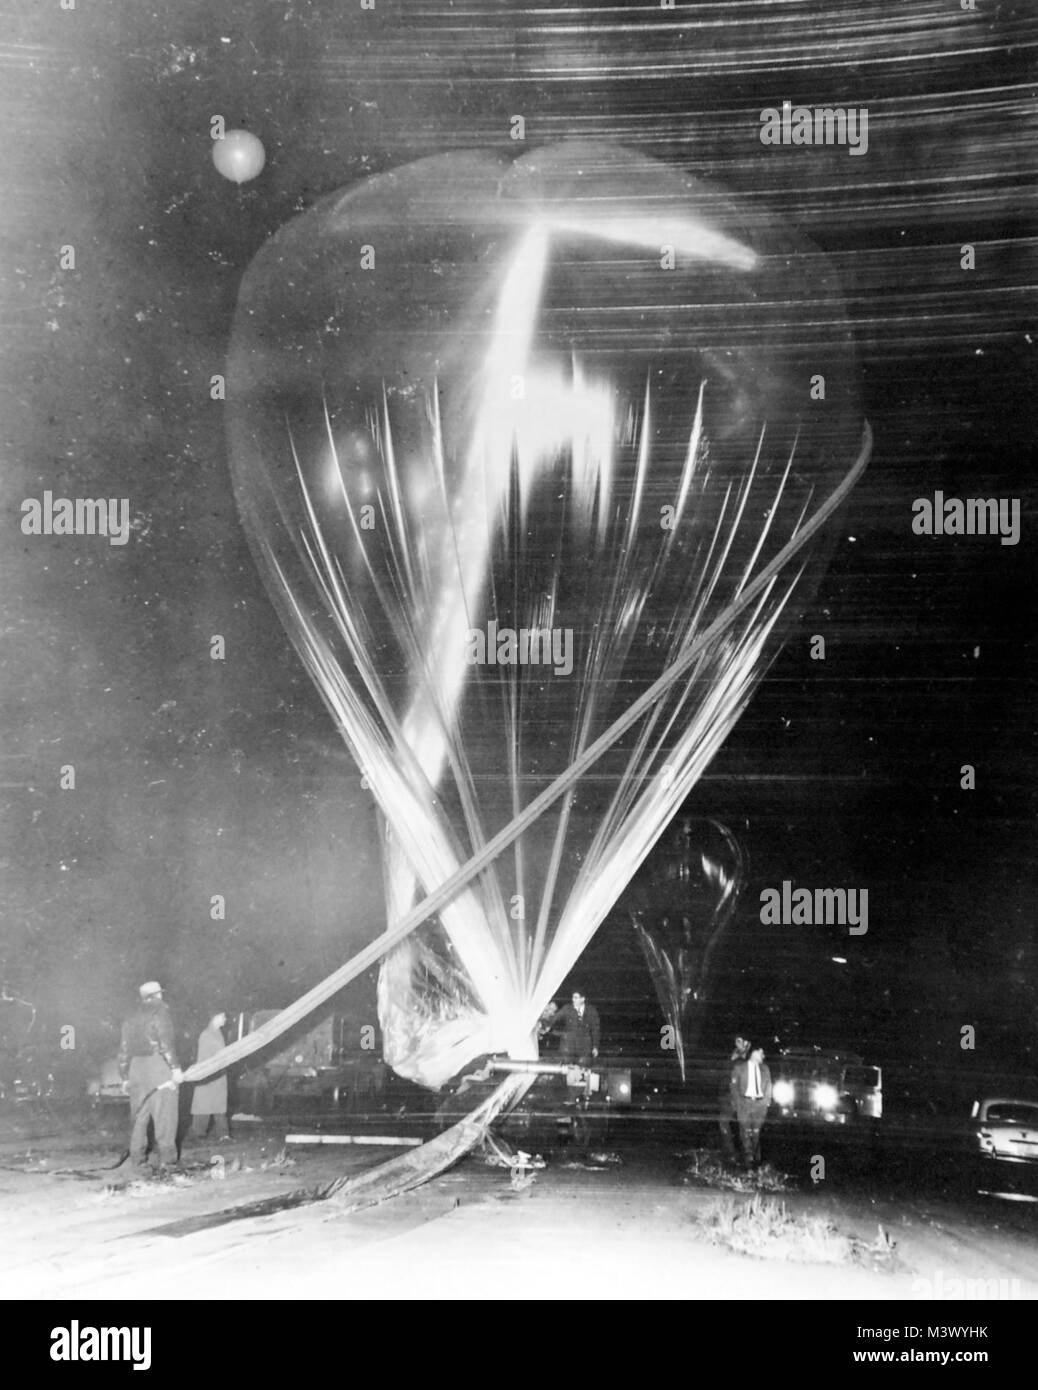 80-G-680470:  Operation “Sky Hook” one of the stages in the inflation and launching of the General Mills “Super Sky Hook” balloon.  Photograph received May 1954.  Official U.S. Navy Photograph, now in the collections of the National Archives.  (2018/01/17). 80-G-680470 25877128368 o Stock Photo